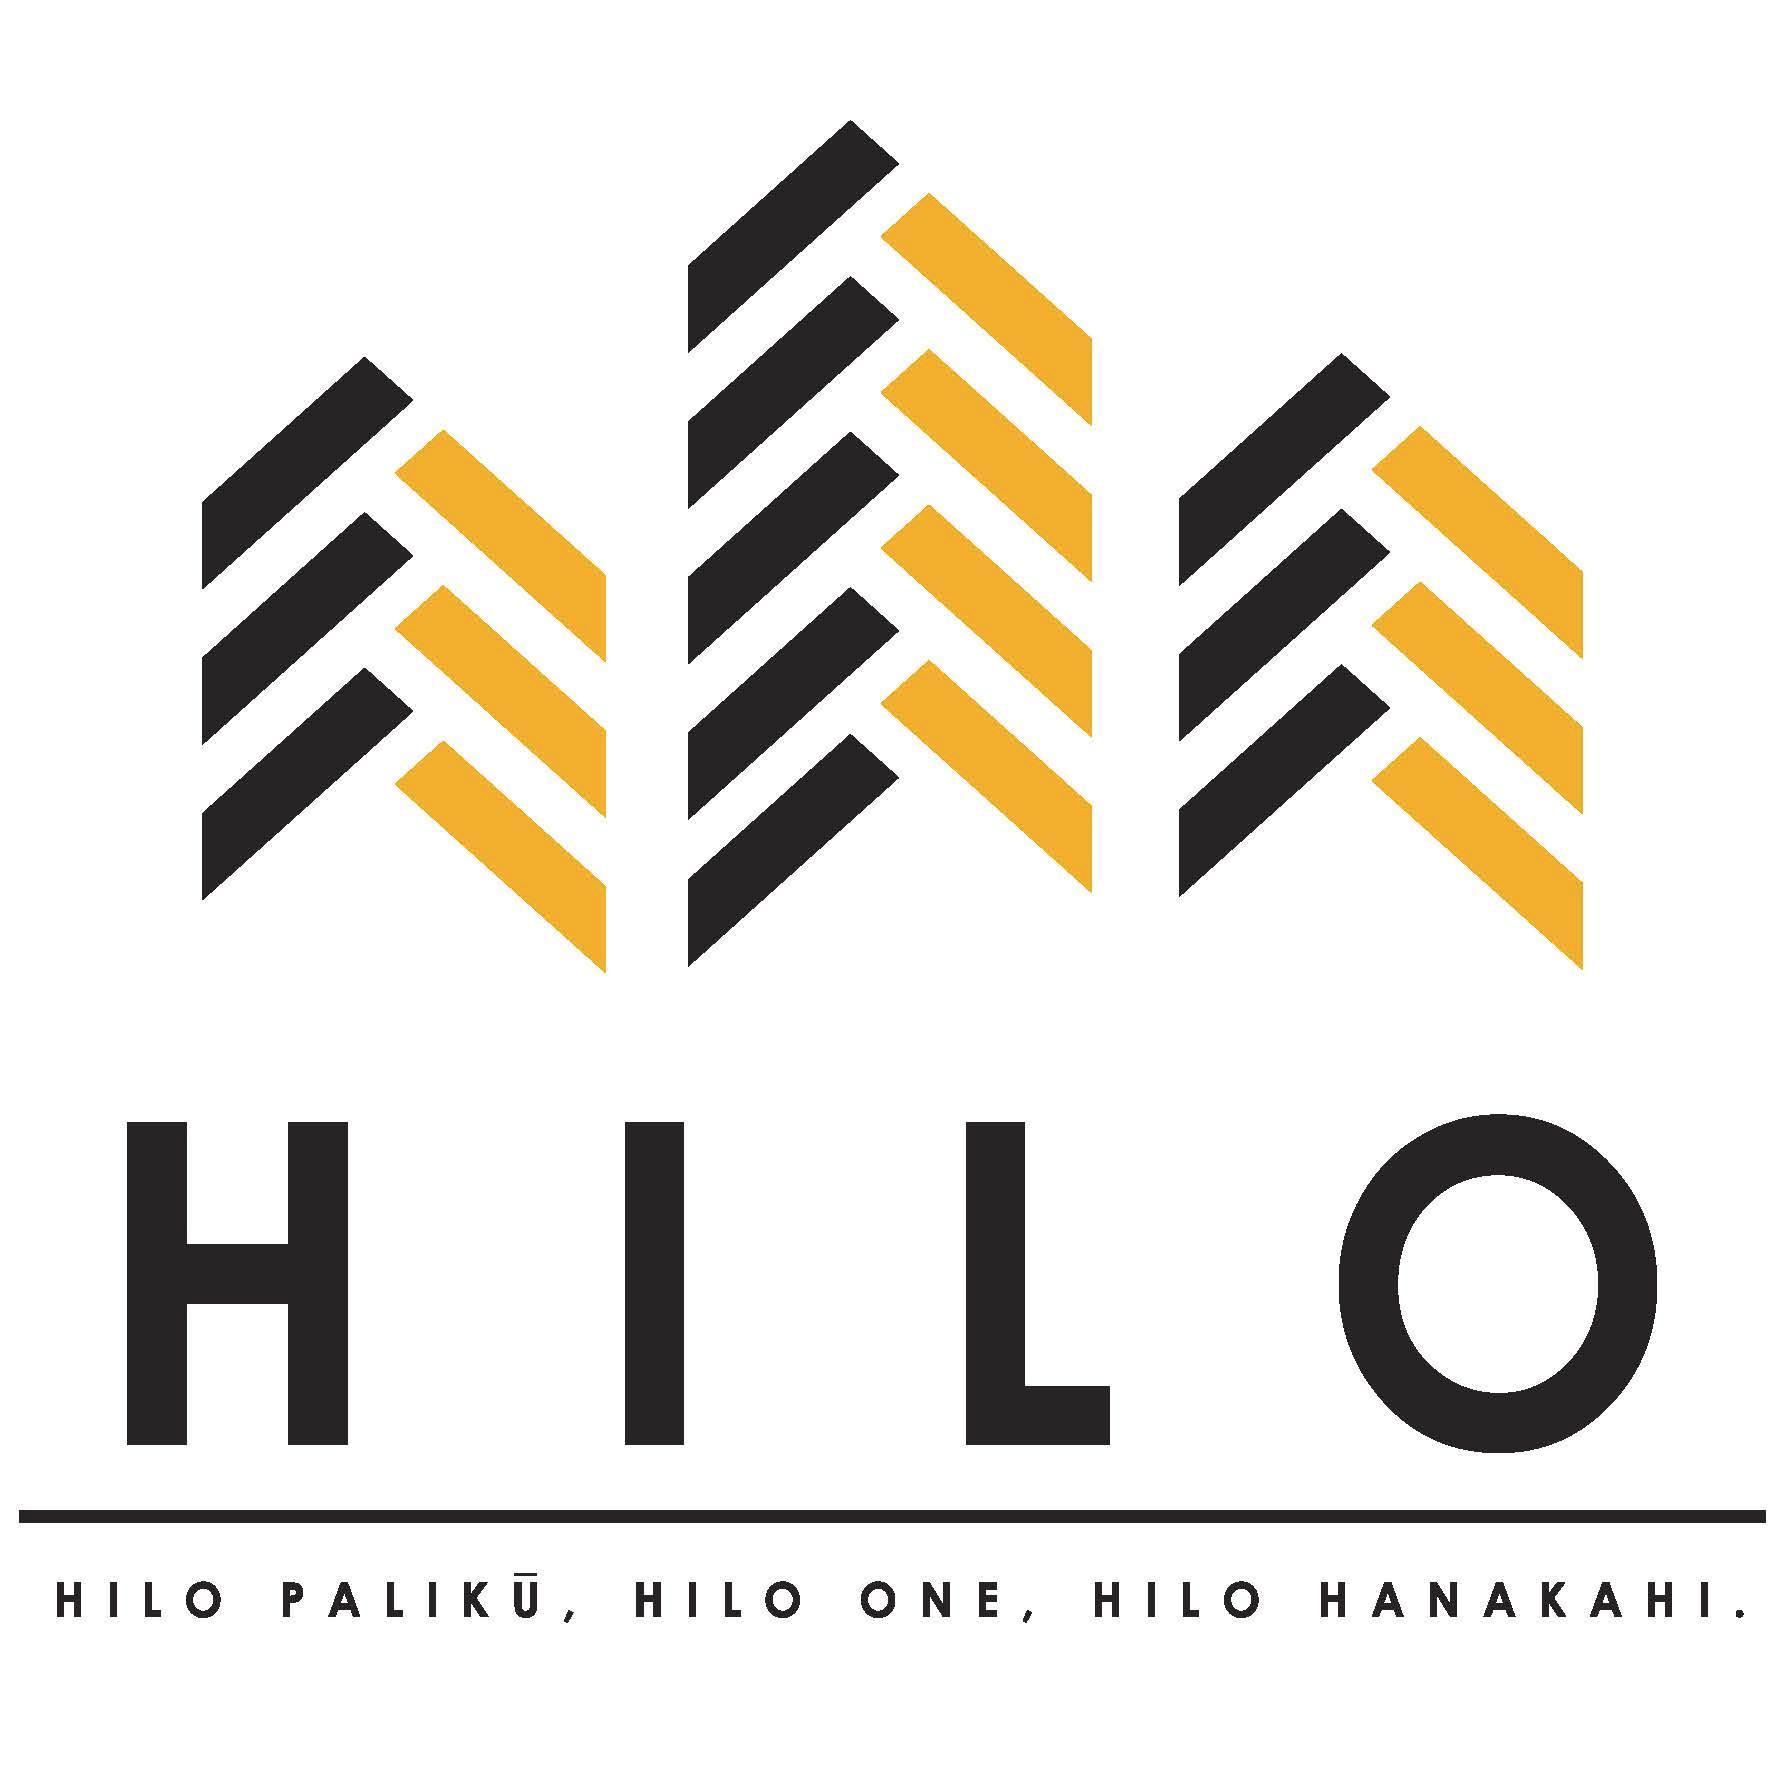 The Hilo Downtown Improvement Assocn—founded, 1962 preserves/revitalizes Hilo’s historic district by supporting small businesses & the community. #downtownhilo